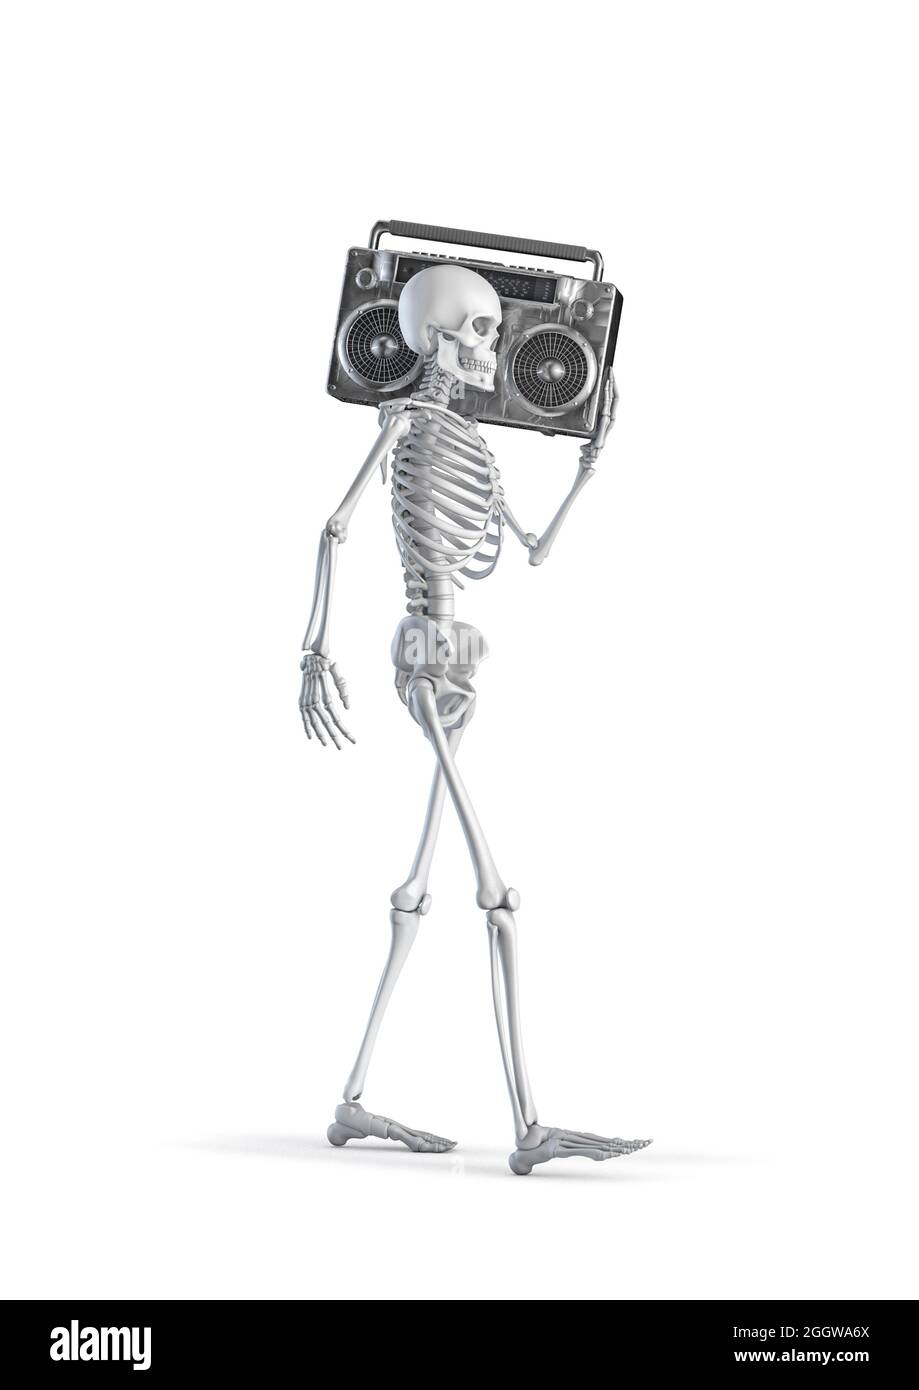 Skeleton with boombox - 3D illustration of male human skeleton figure carrying retro 80s stereo cassette player isolated on white studio background Stock Photo